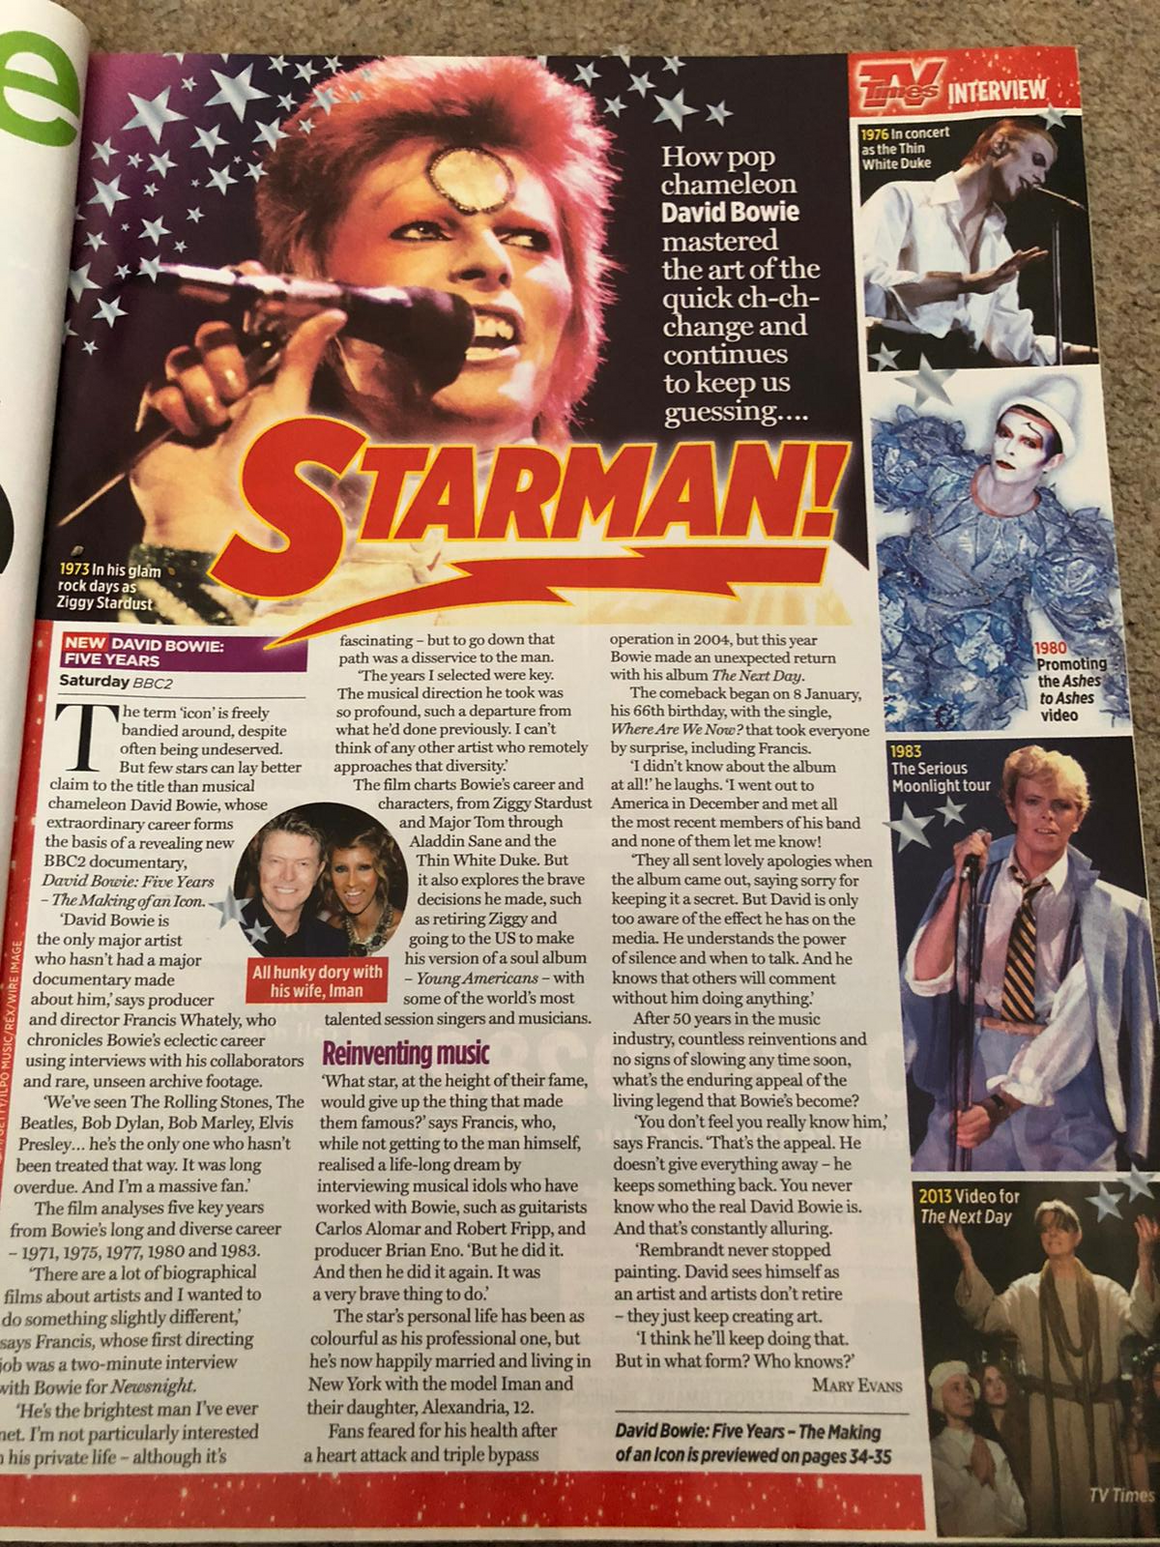 UK TV Times Magazine 25 May 2013: David Bowie Five Years